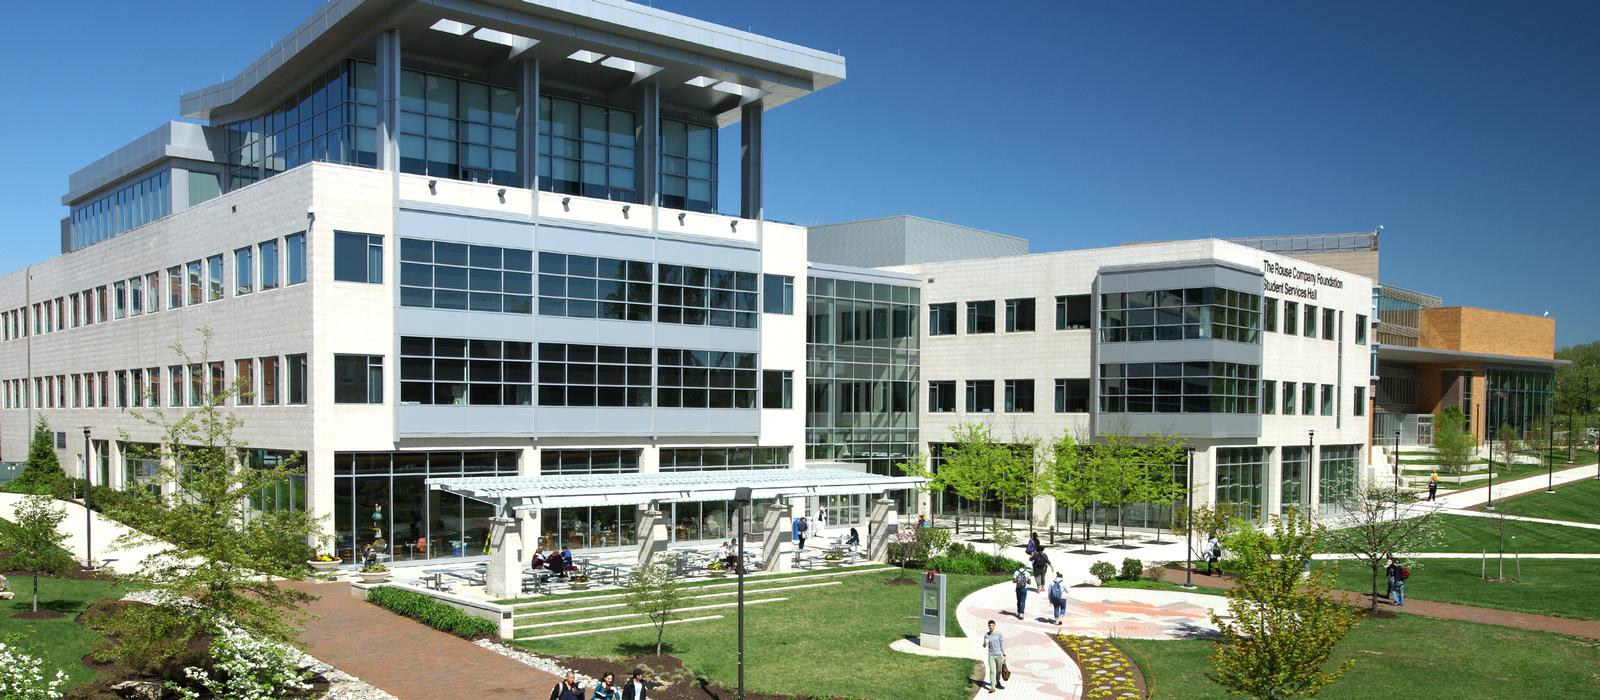 Howard County Community College